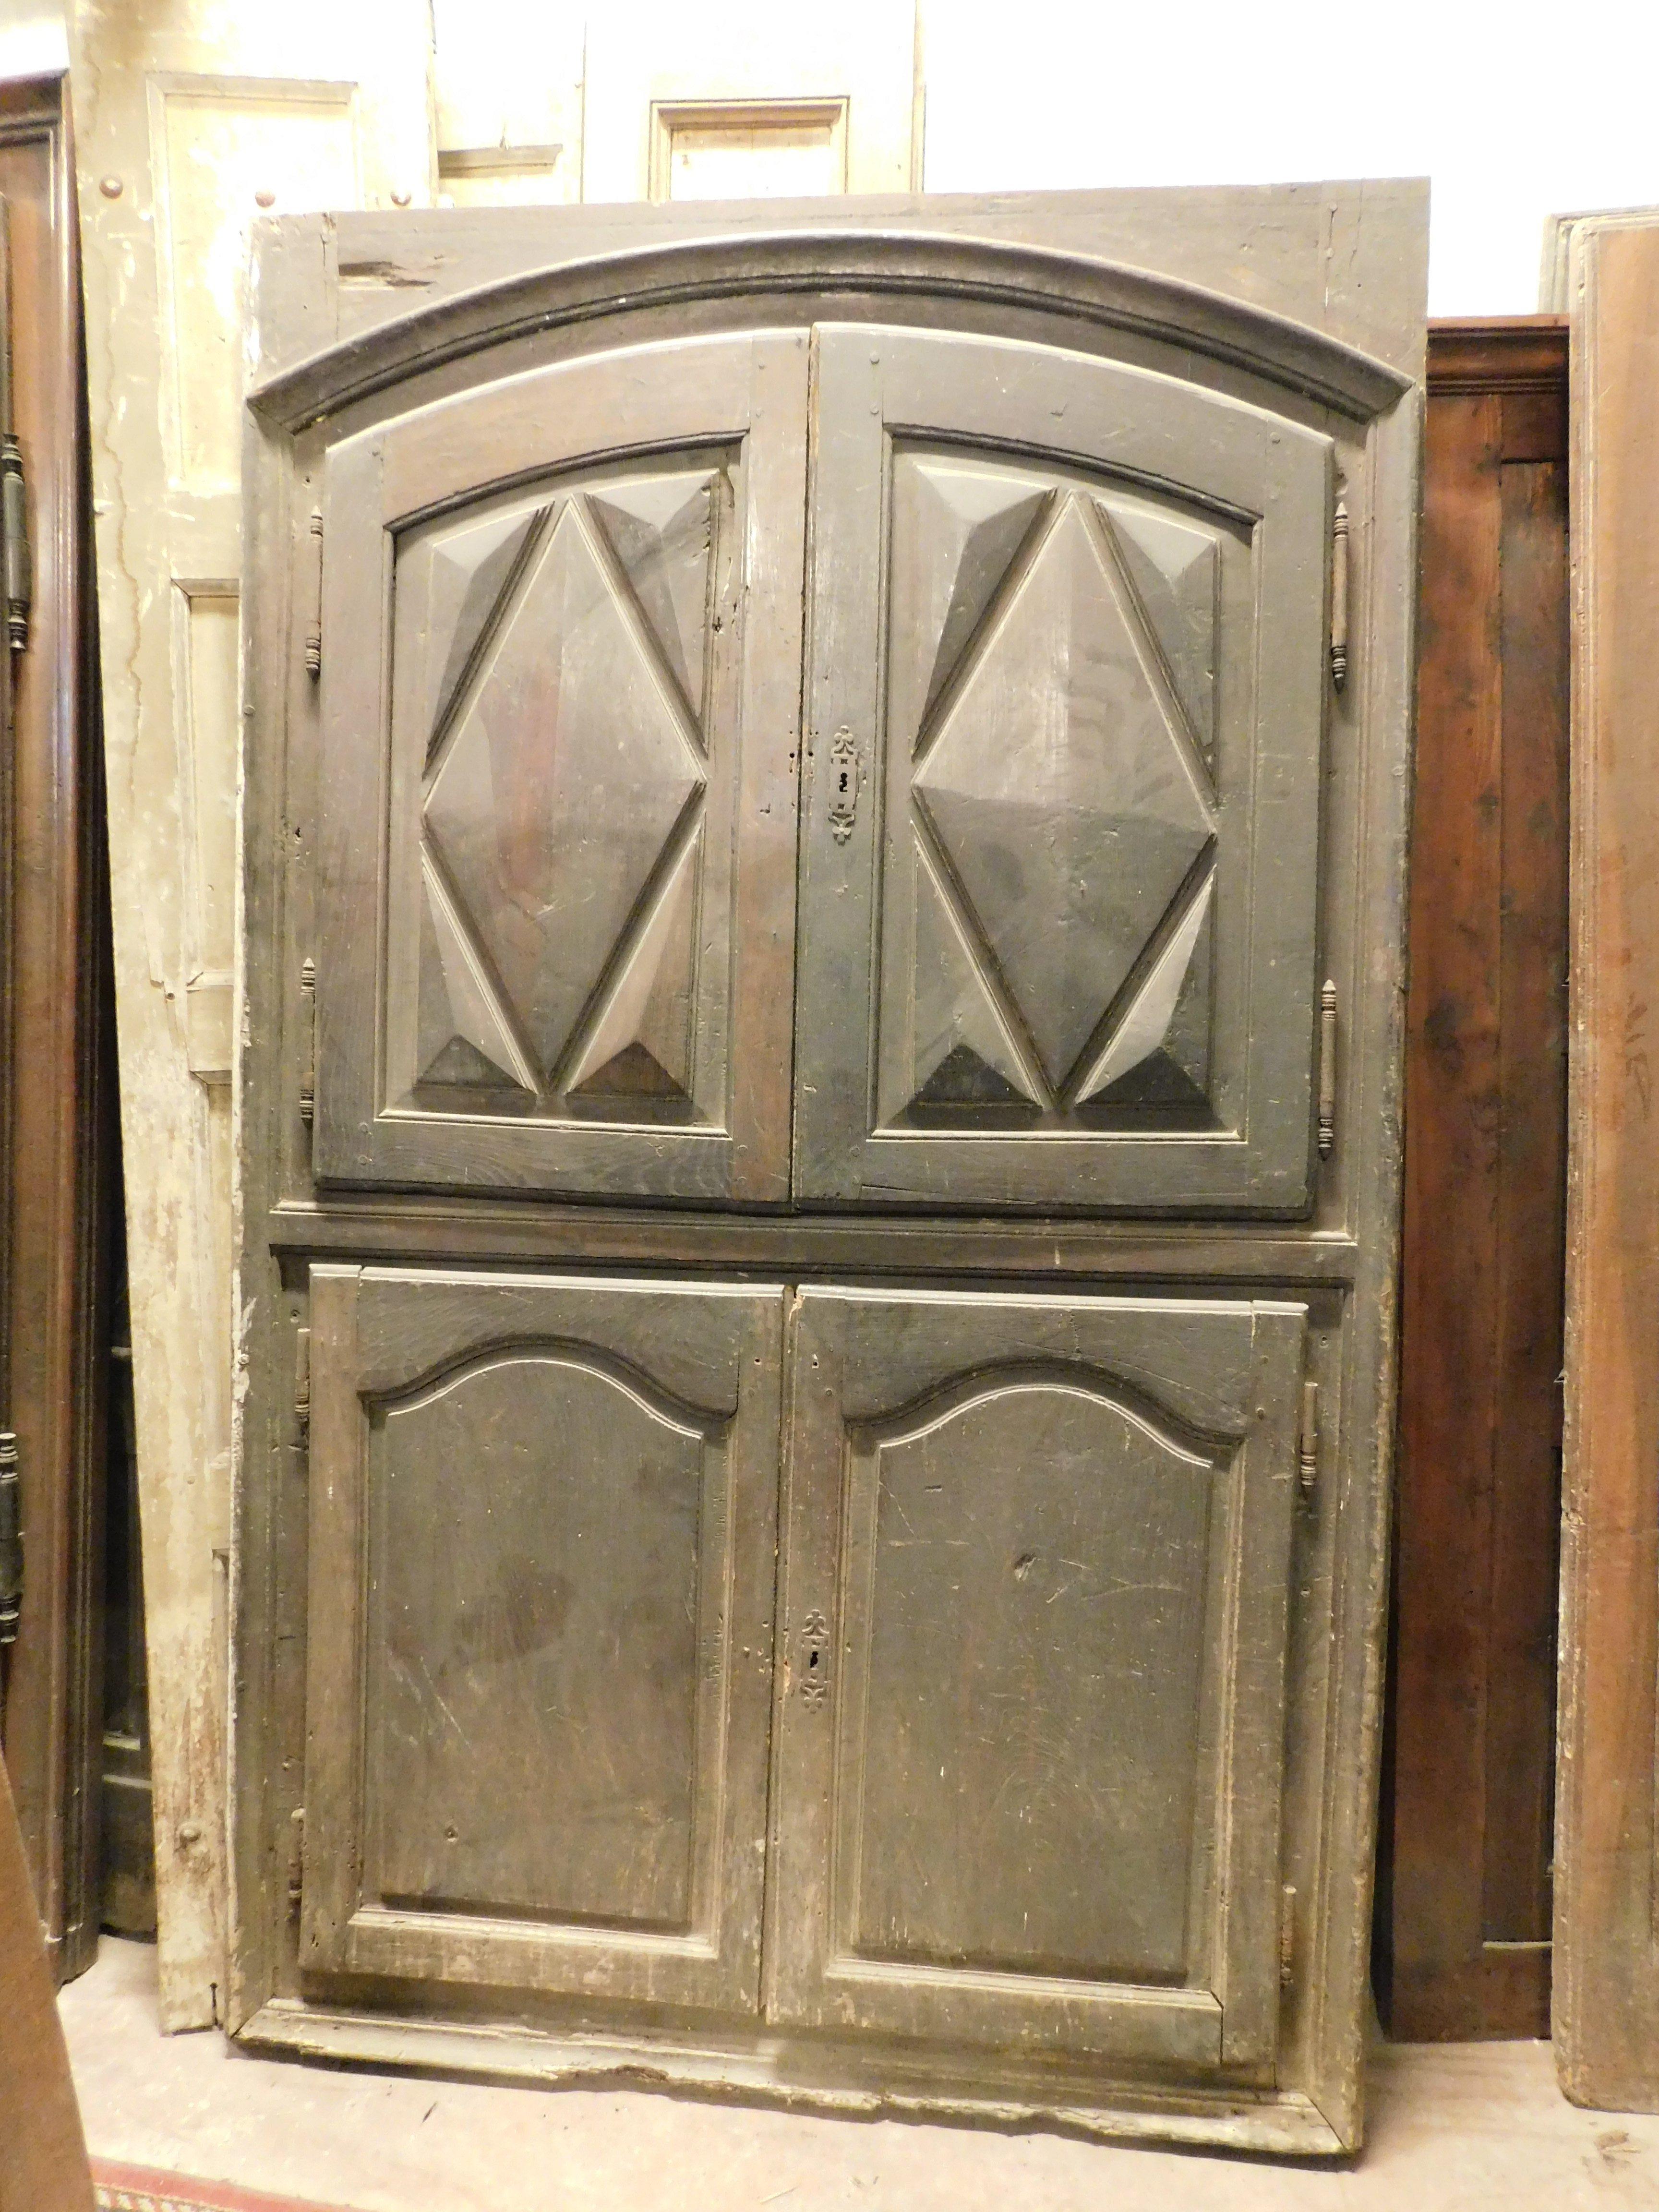 Antique placard, wall cabinet, wall wardrobe, of great value, entirely hand-carved in solid chestnut wood with diamond-pointed panels, very valuable, hand-built in Italy in the 1600s, original and with patina from past centuries intact, therefore